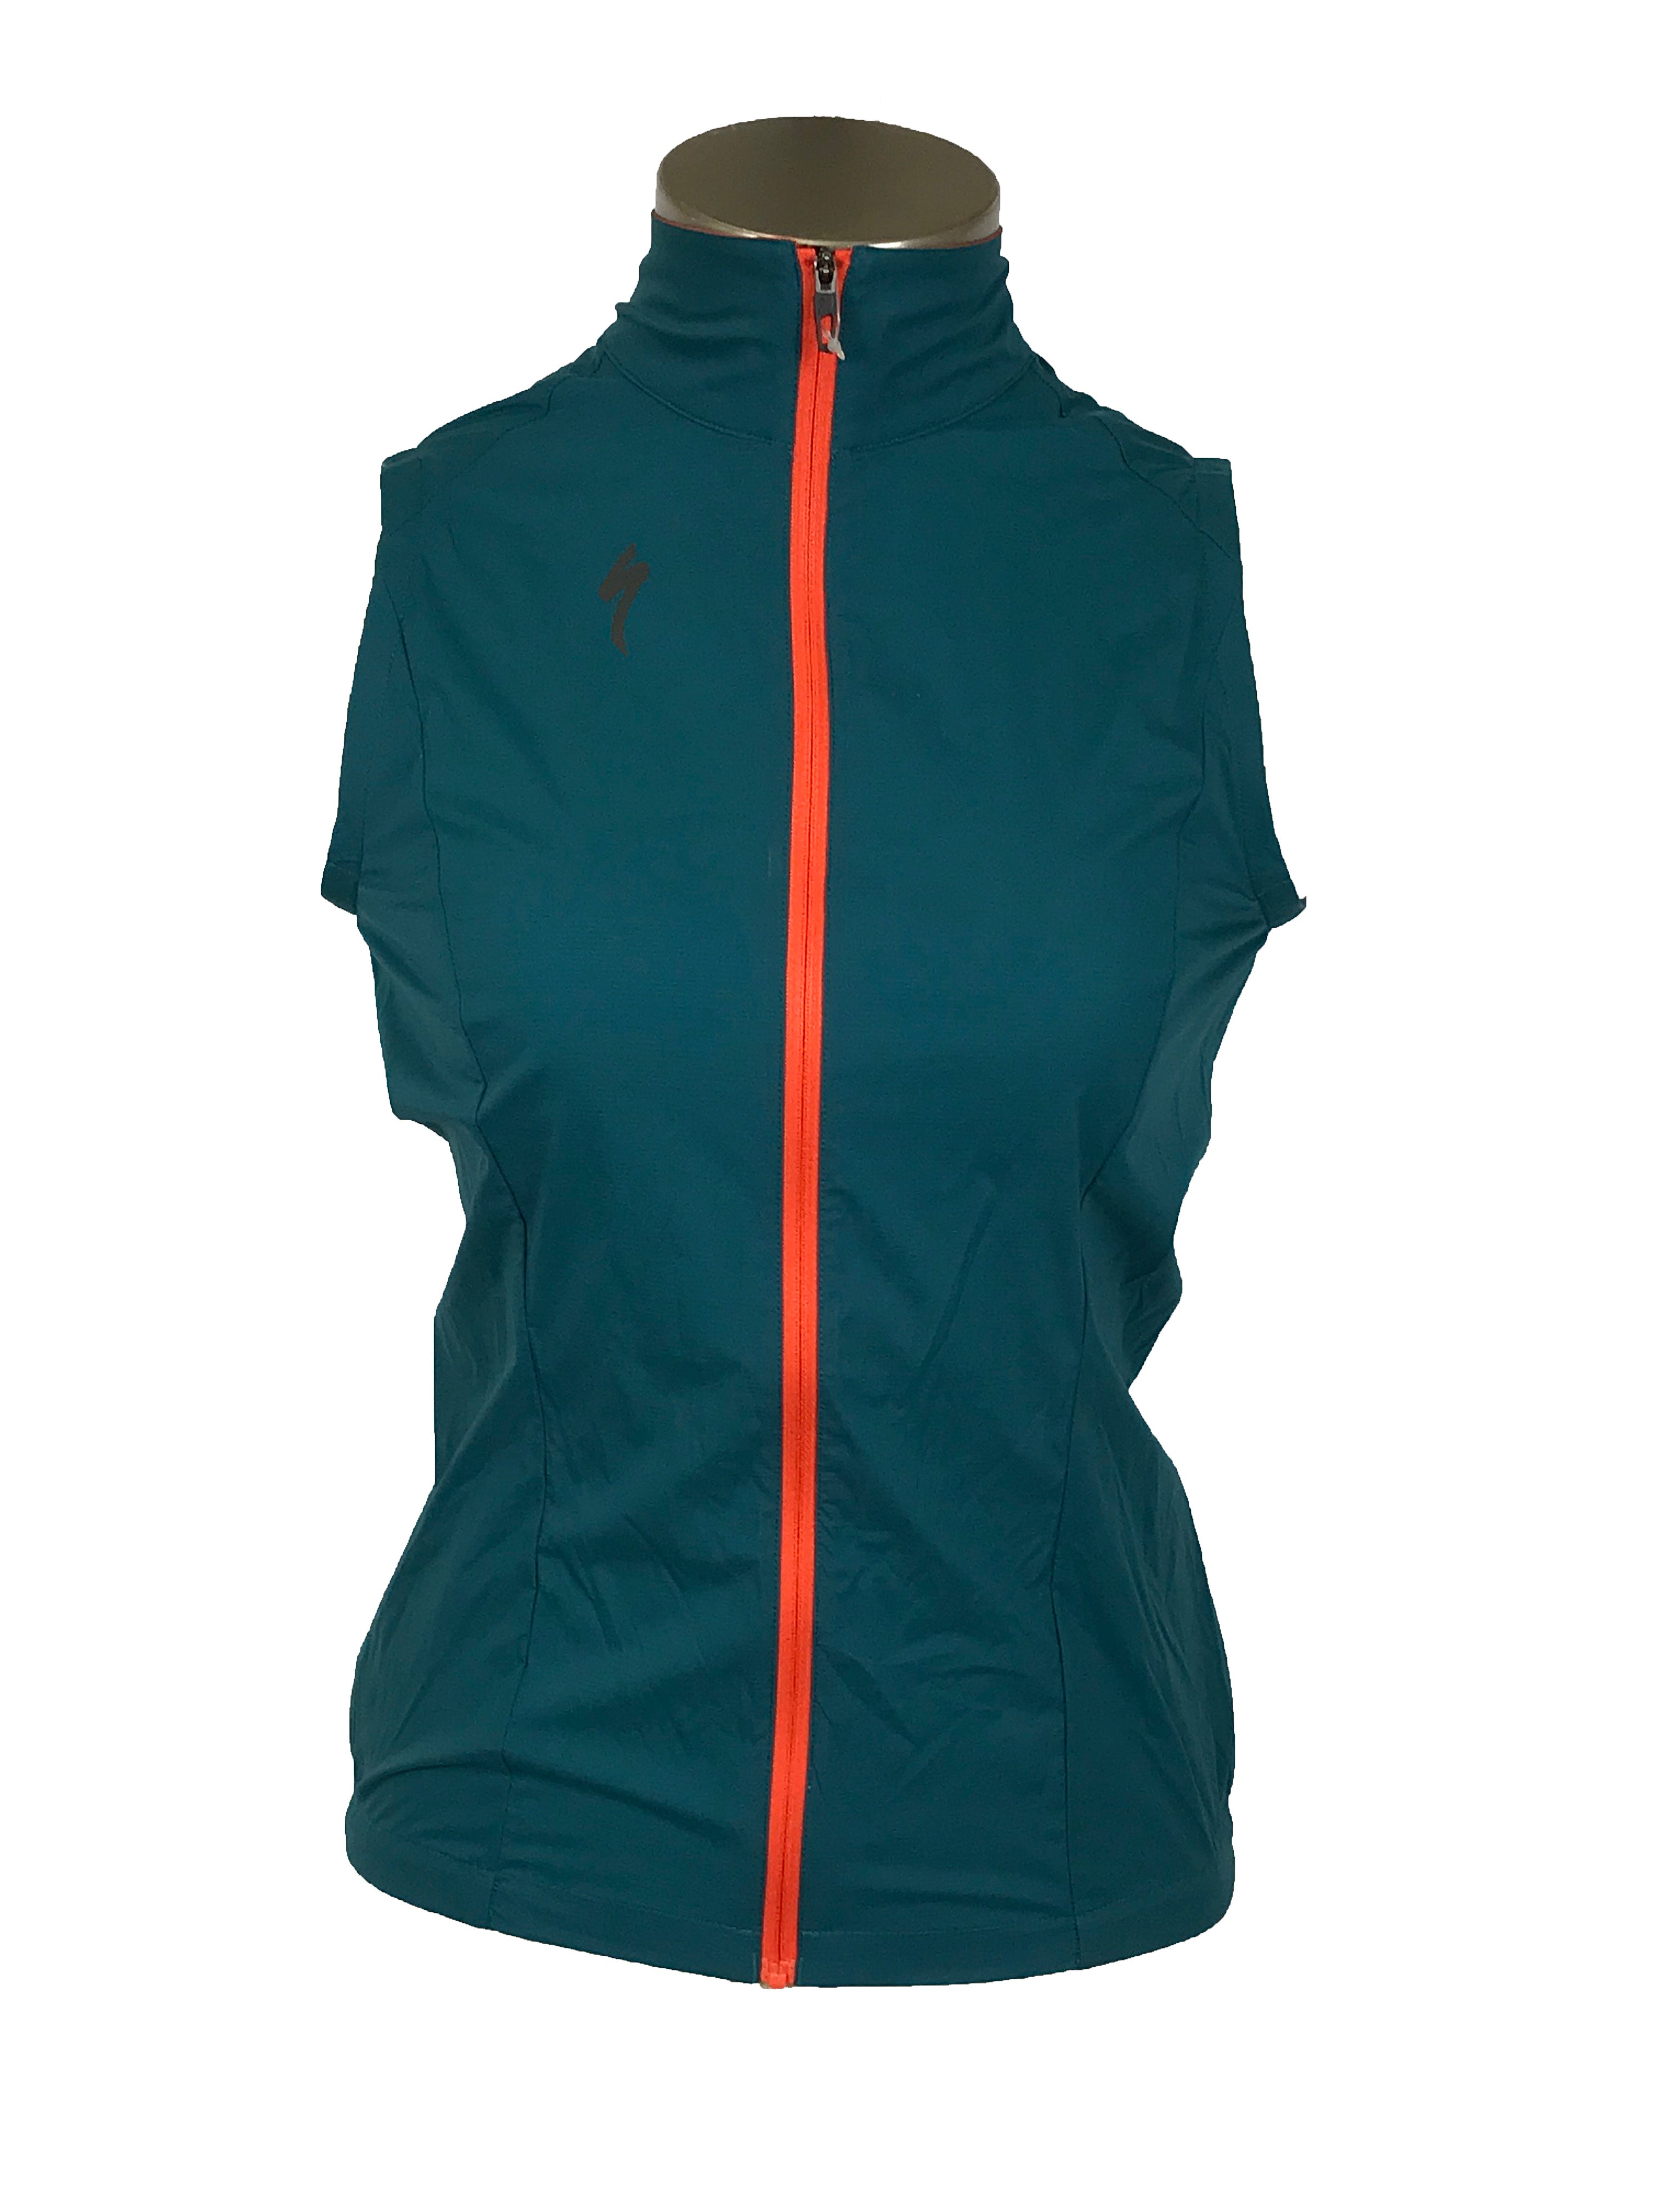 Specialized Deflect Teal Wind Vest Women's Size S NWT